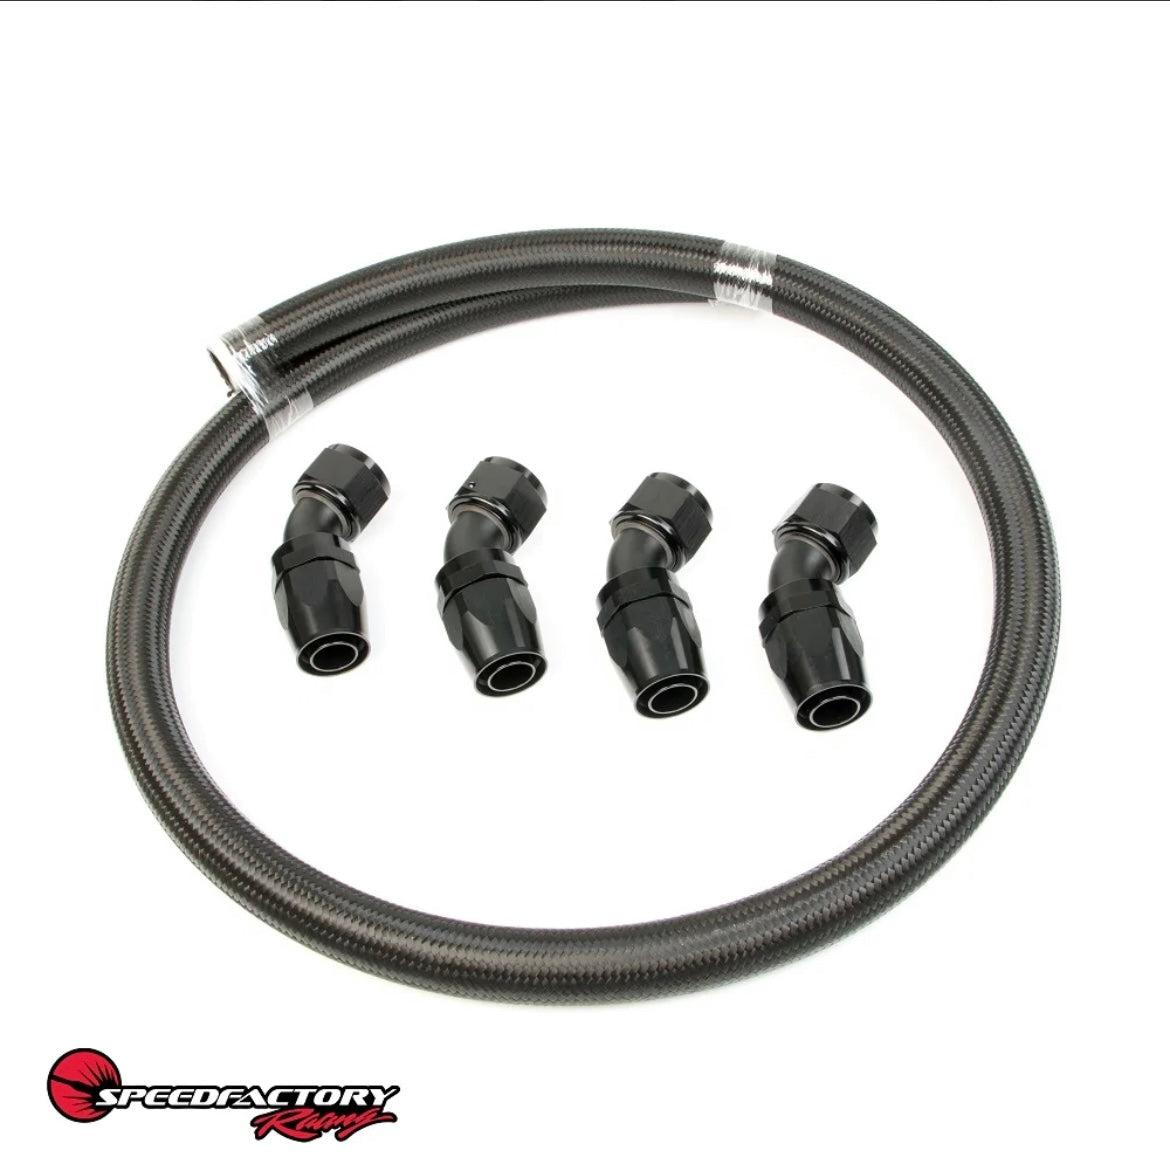 SpeedFactory Racing Tucked Radiator -16 AN Hose and Fitting Kit For B / D / F / H-Series